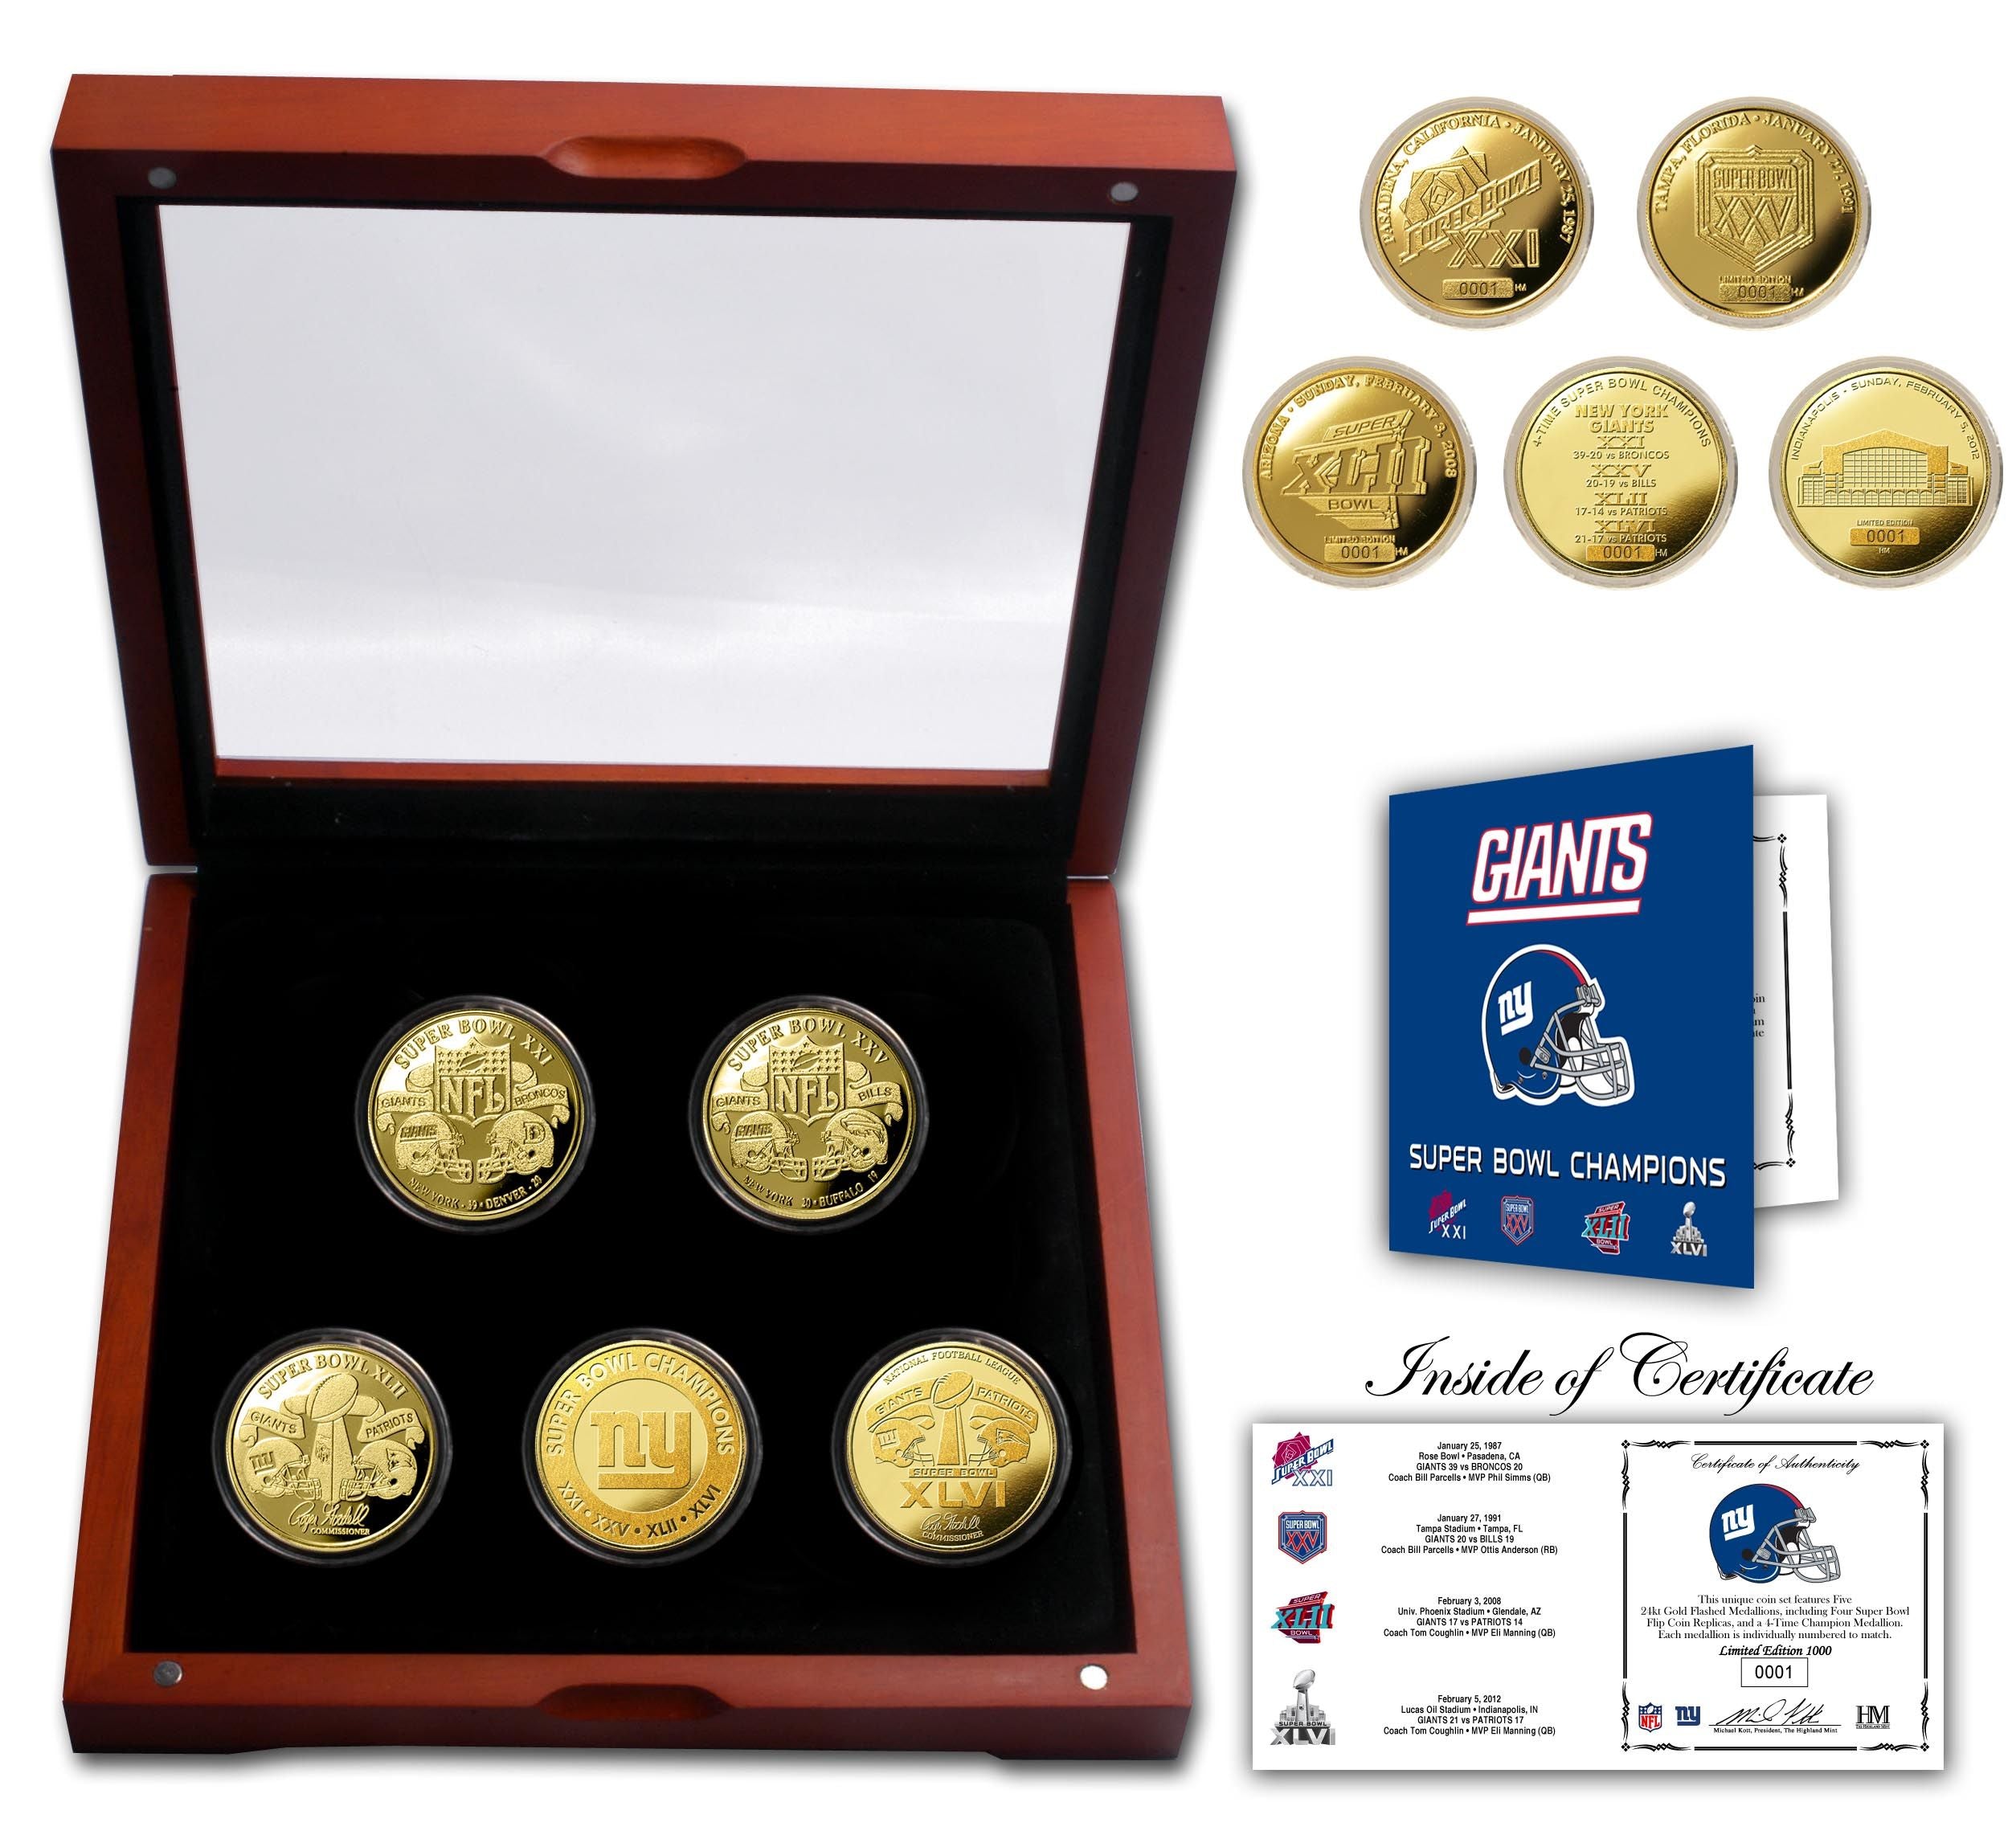 New York Giants 4-time Super Bowl Champions 5 Coin Gold Coin Set